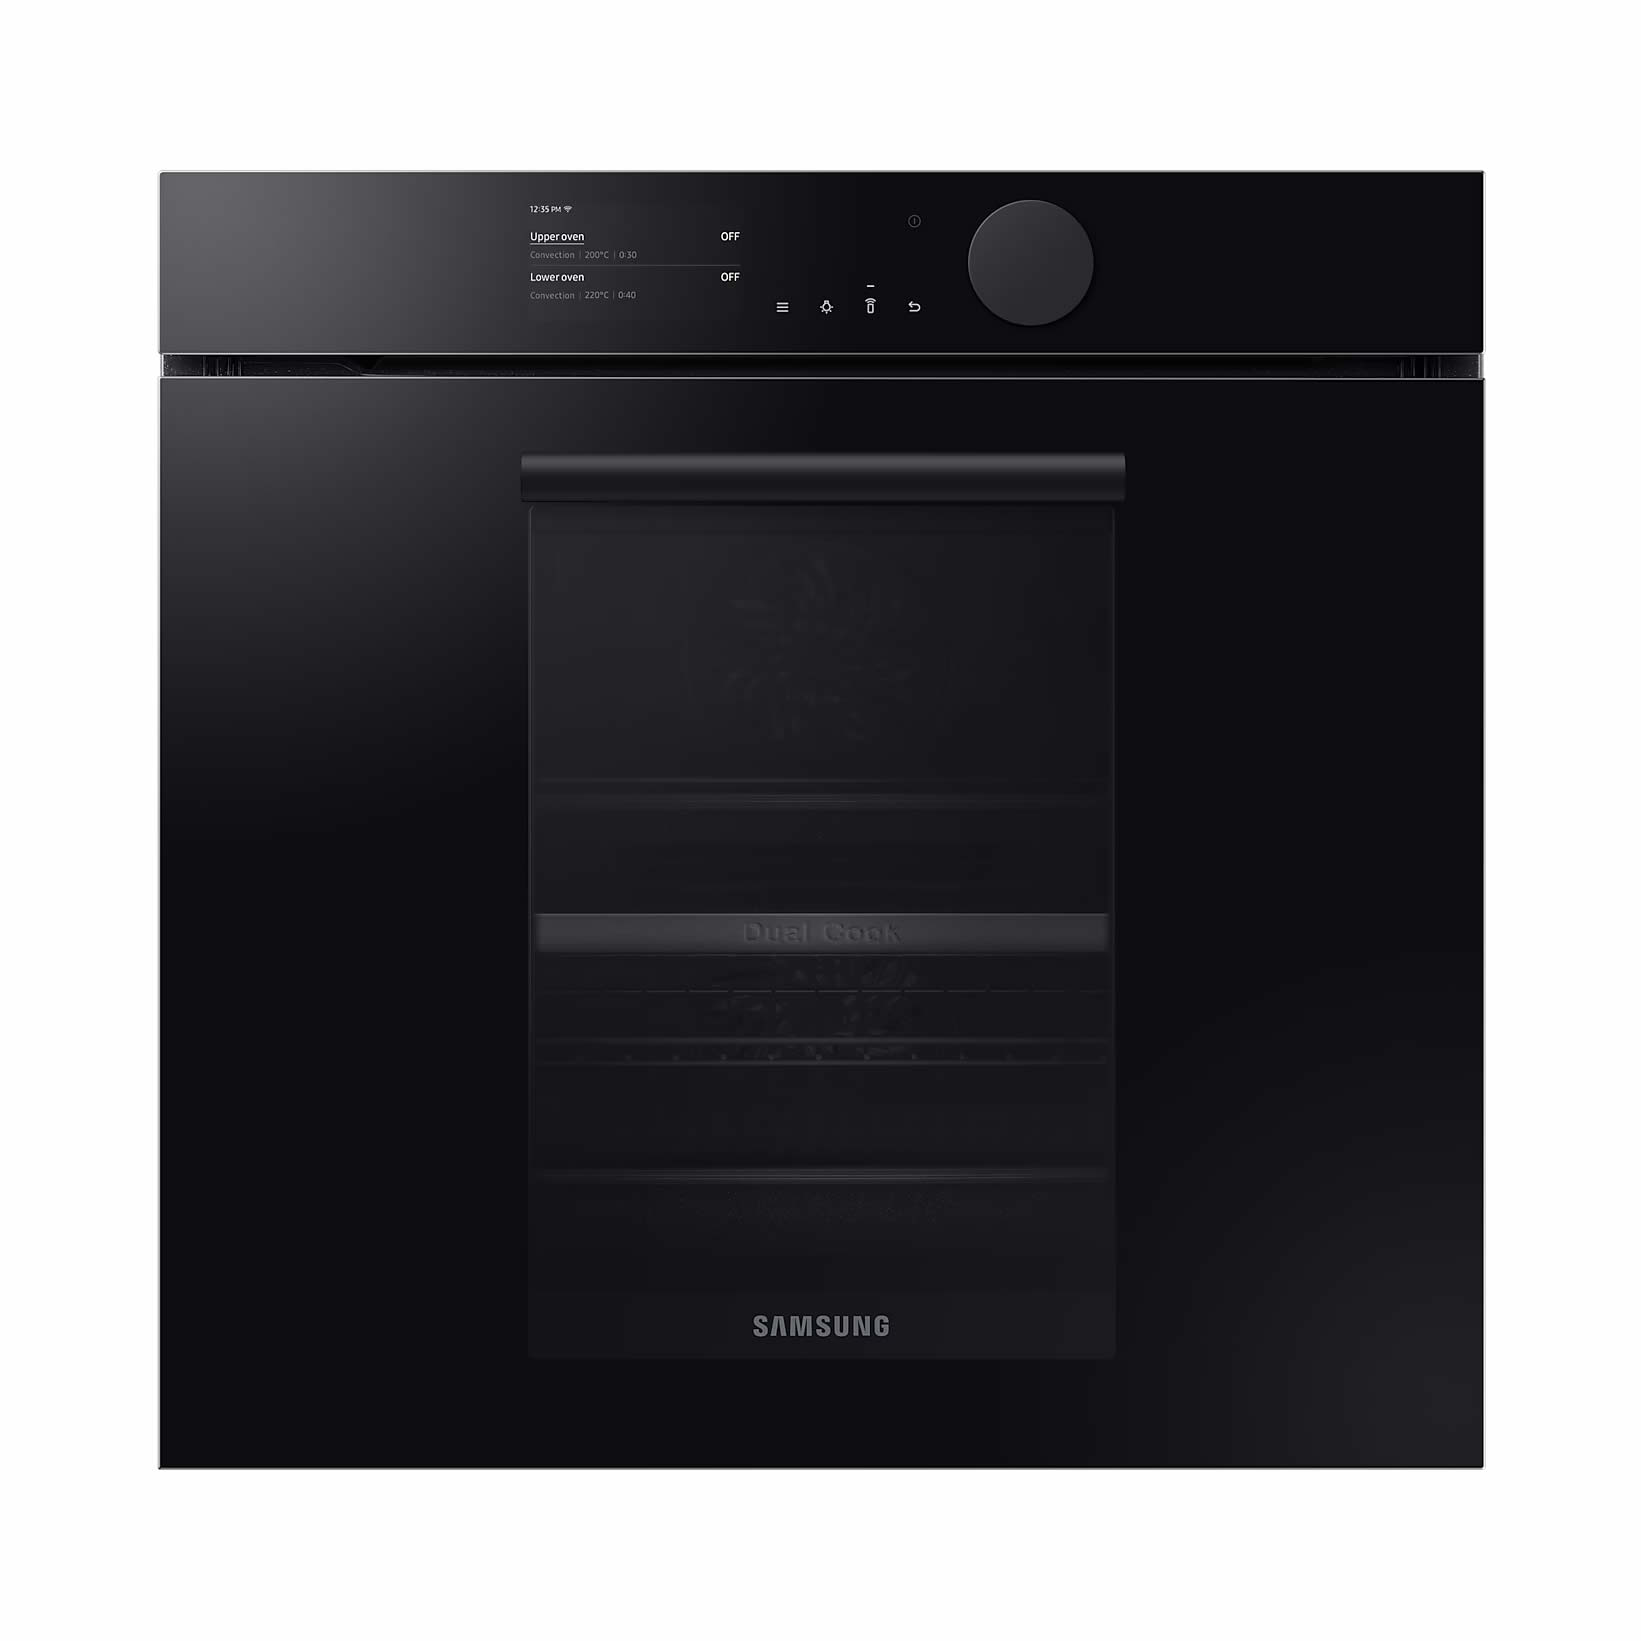 Samsung Built-in Electric Single LED Display Dual Cook